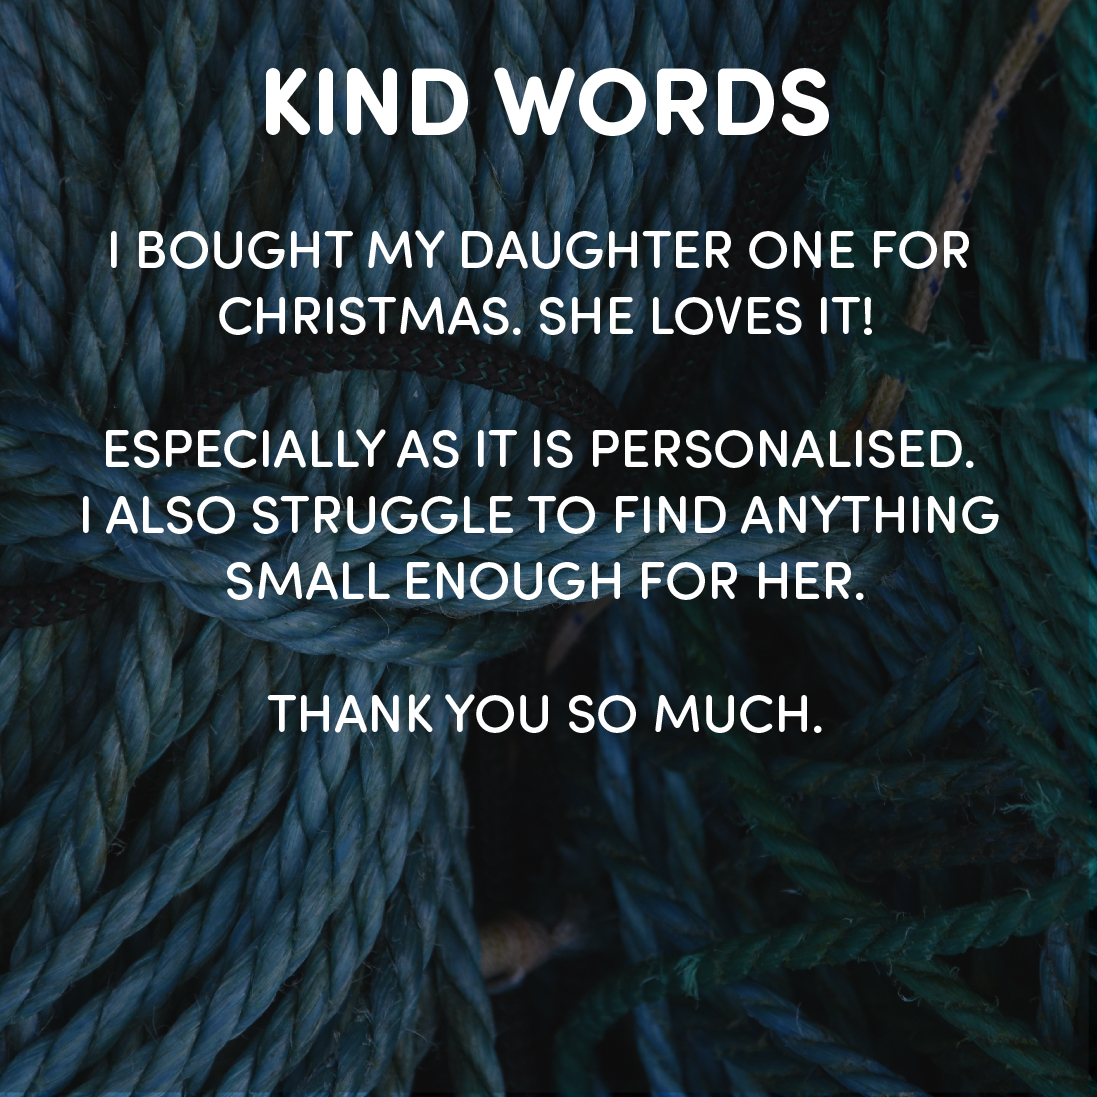 Kind Words

'I bought my daughter one for Christmas. She loves it! Especially as it personalised. I also struggle to find anything small enough for her. Thank you so much'

#ecogift #ecopresent #sustainablepresents #sustainablegifts #sustainablegift #sustainablegiftsuk #seagift